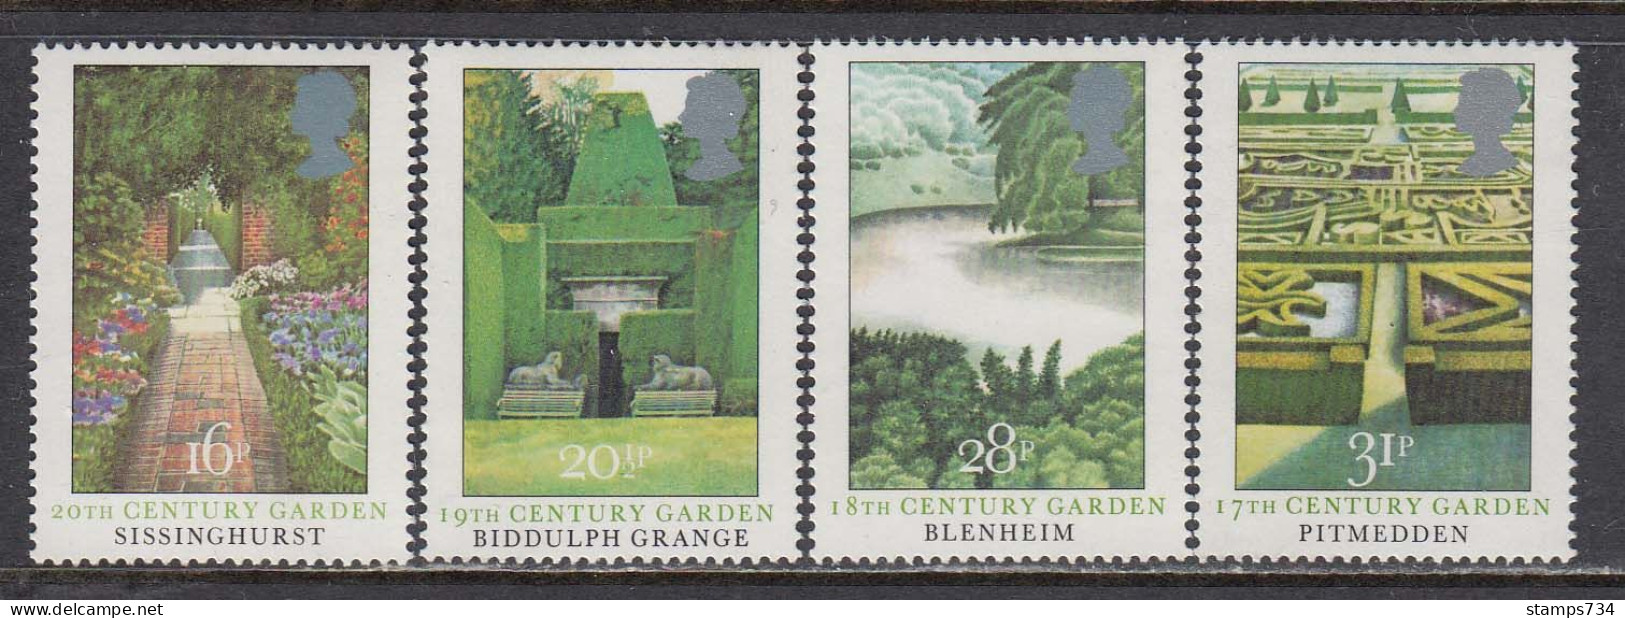 Great Britain 1983 - British Gardens, Set Of 4 Stamps, MNH** - Unused Stamps